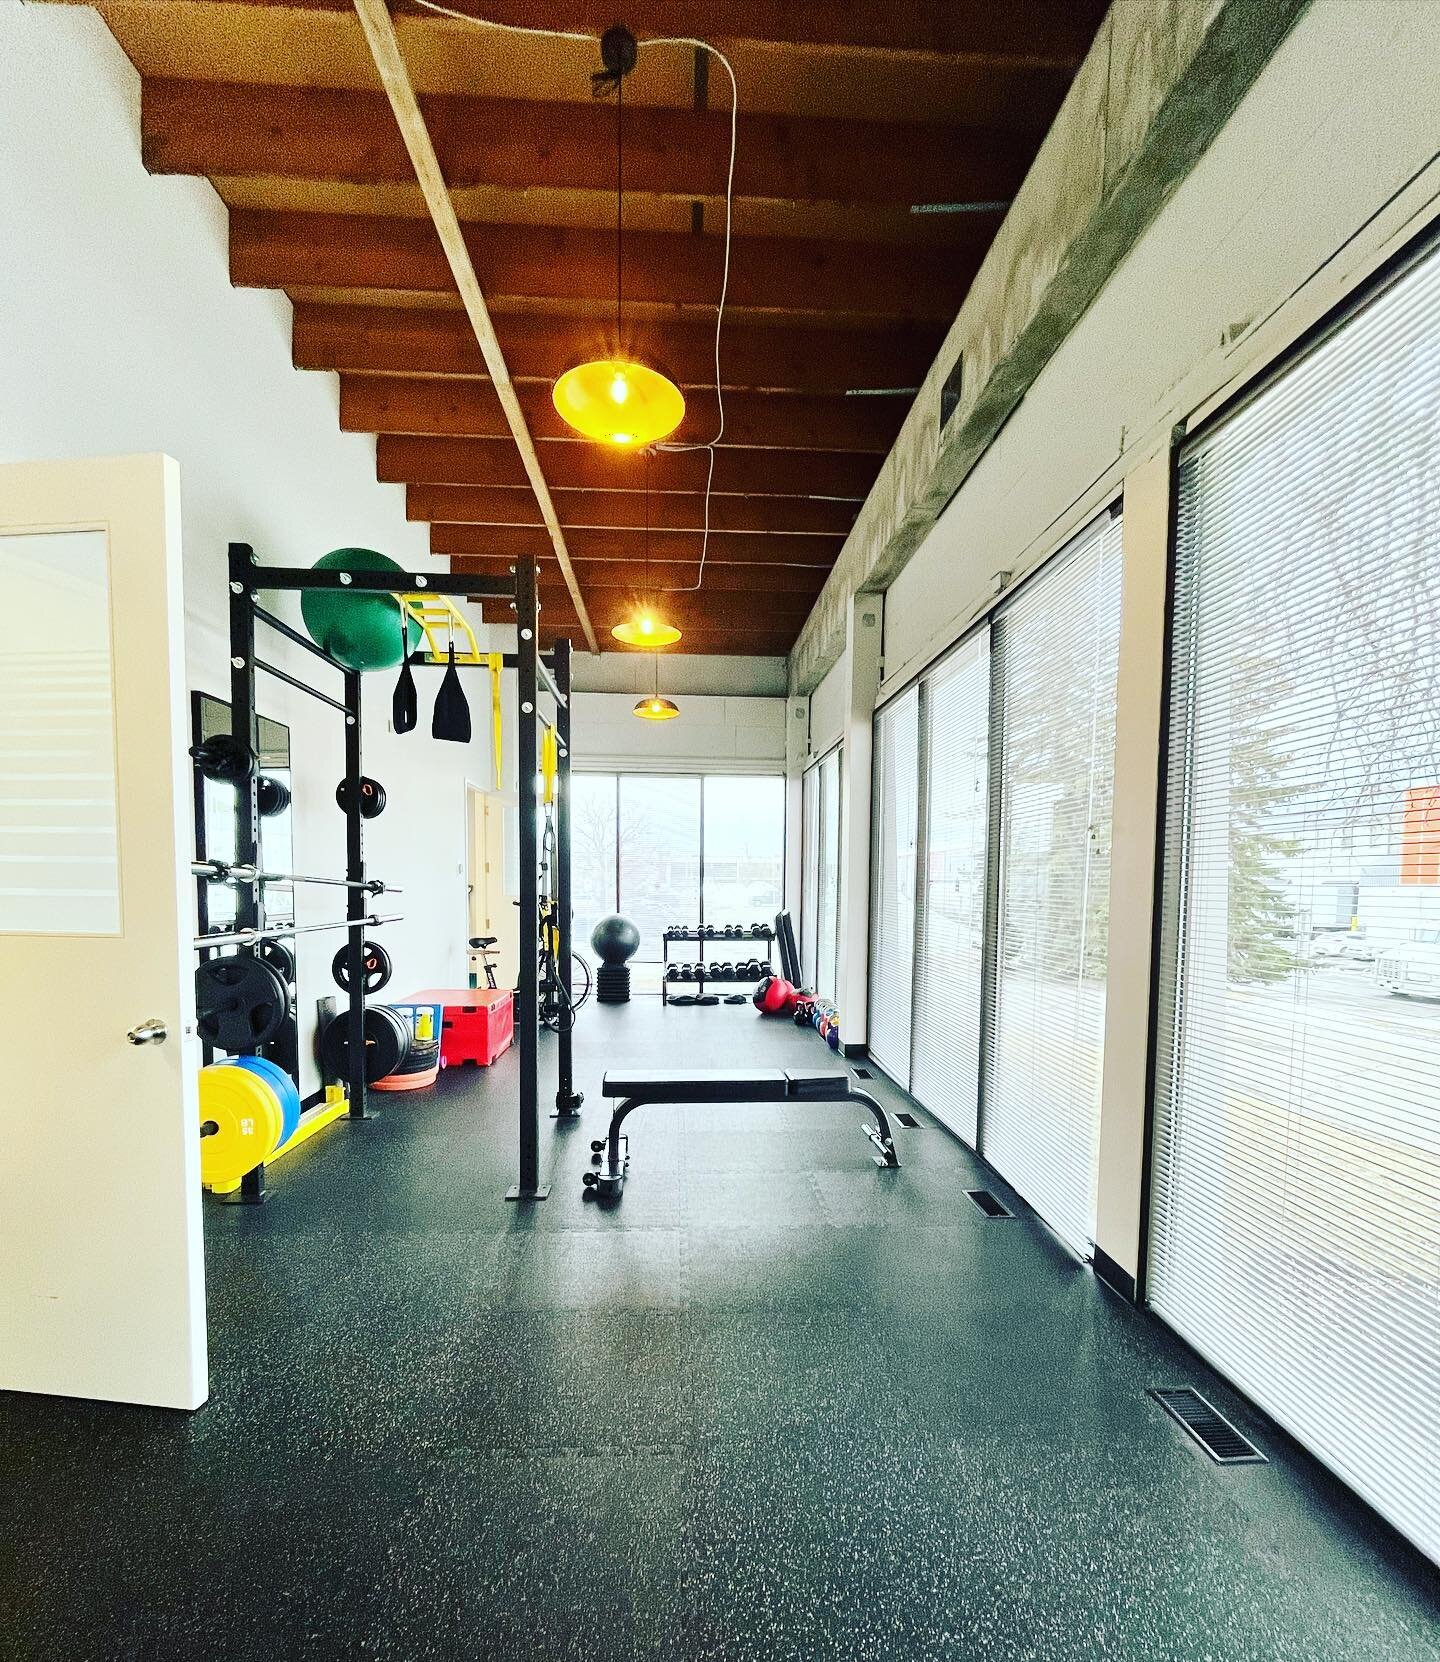 At the Loft we have 4 Private Studios available for bookings! Our most popular clients are Personal Trainers. We also cater to many other health Professionals including Osteopaths, Nutritionists, Athletic Therapists, Photographers and Stretch Therapi